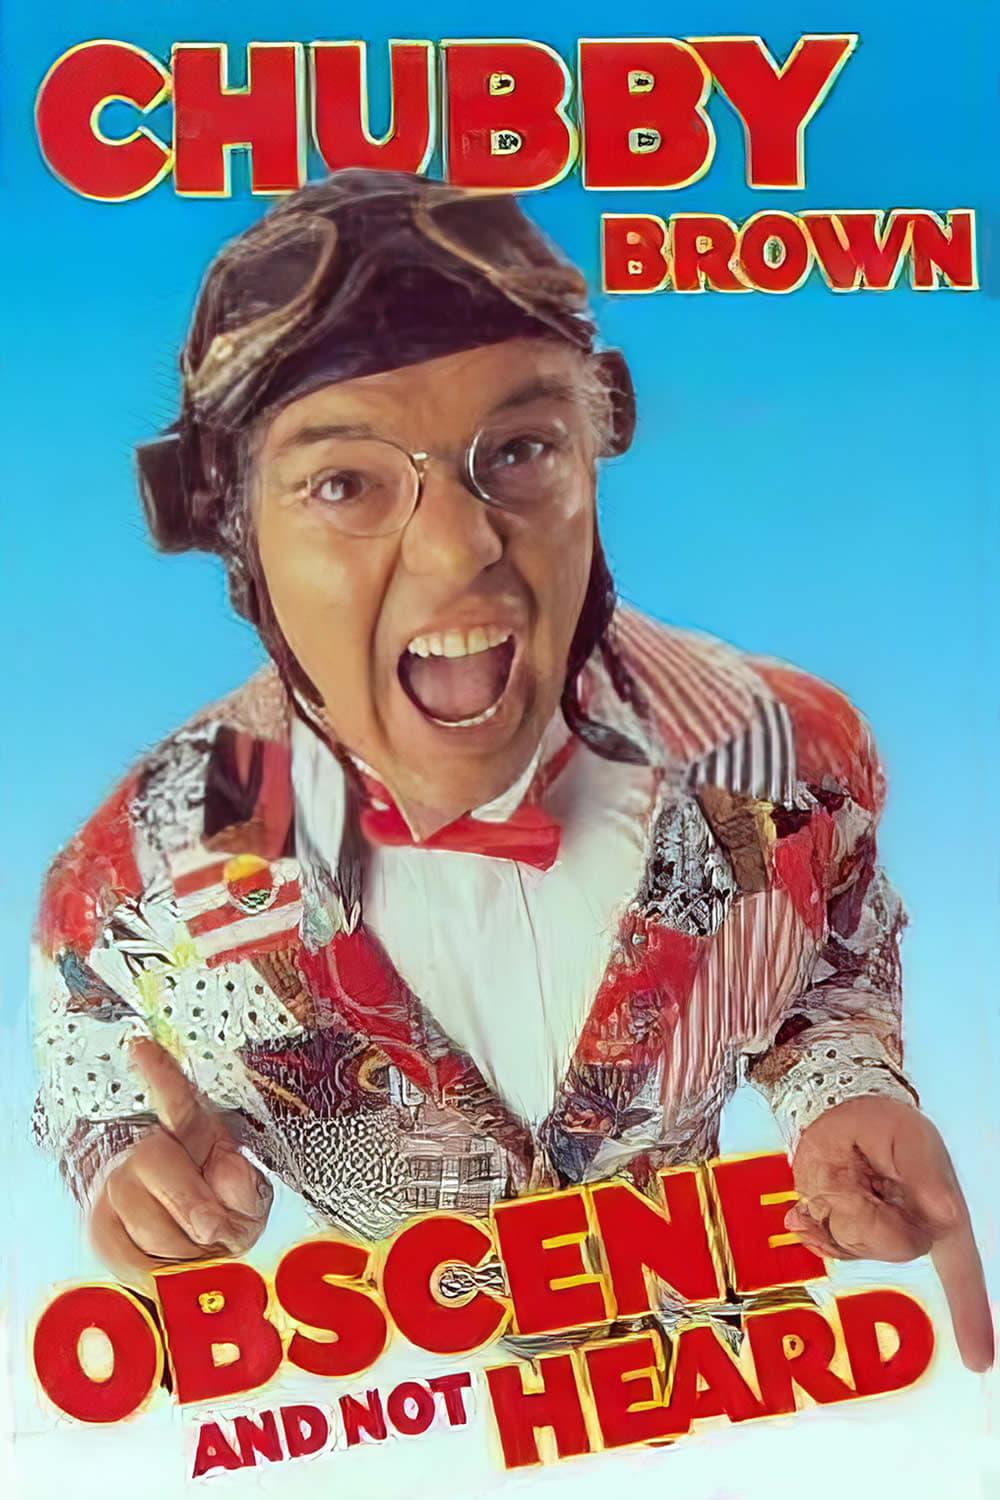 Roy Chubby Brown: Obscene and Not Heard poster